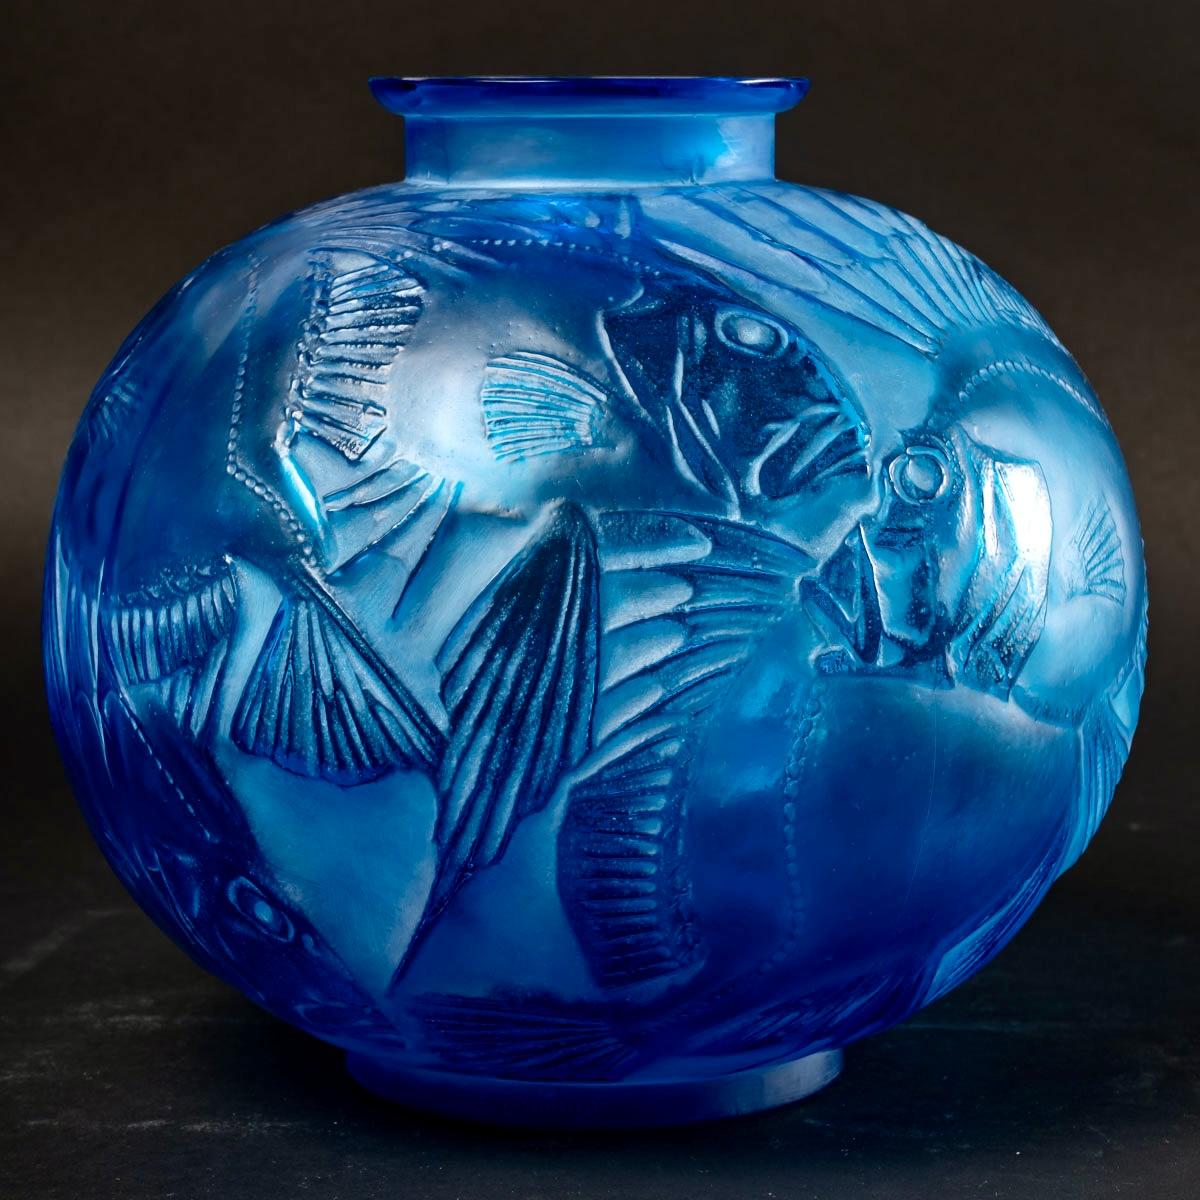 Molded 1921 René Lalique Poissons Vase Electric Blue Glass with White Patina, Fishes